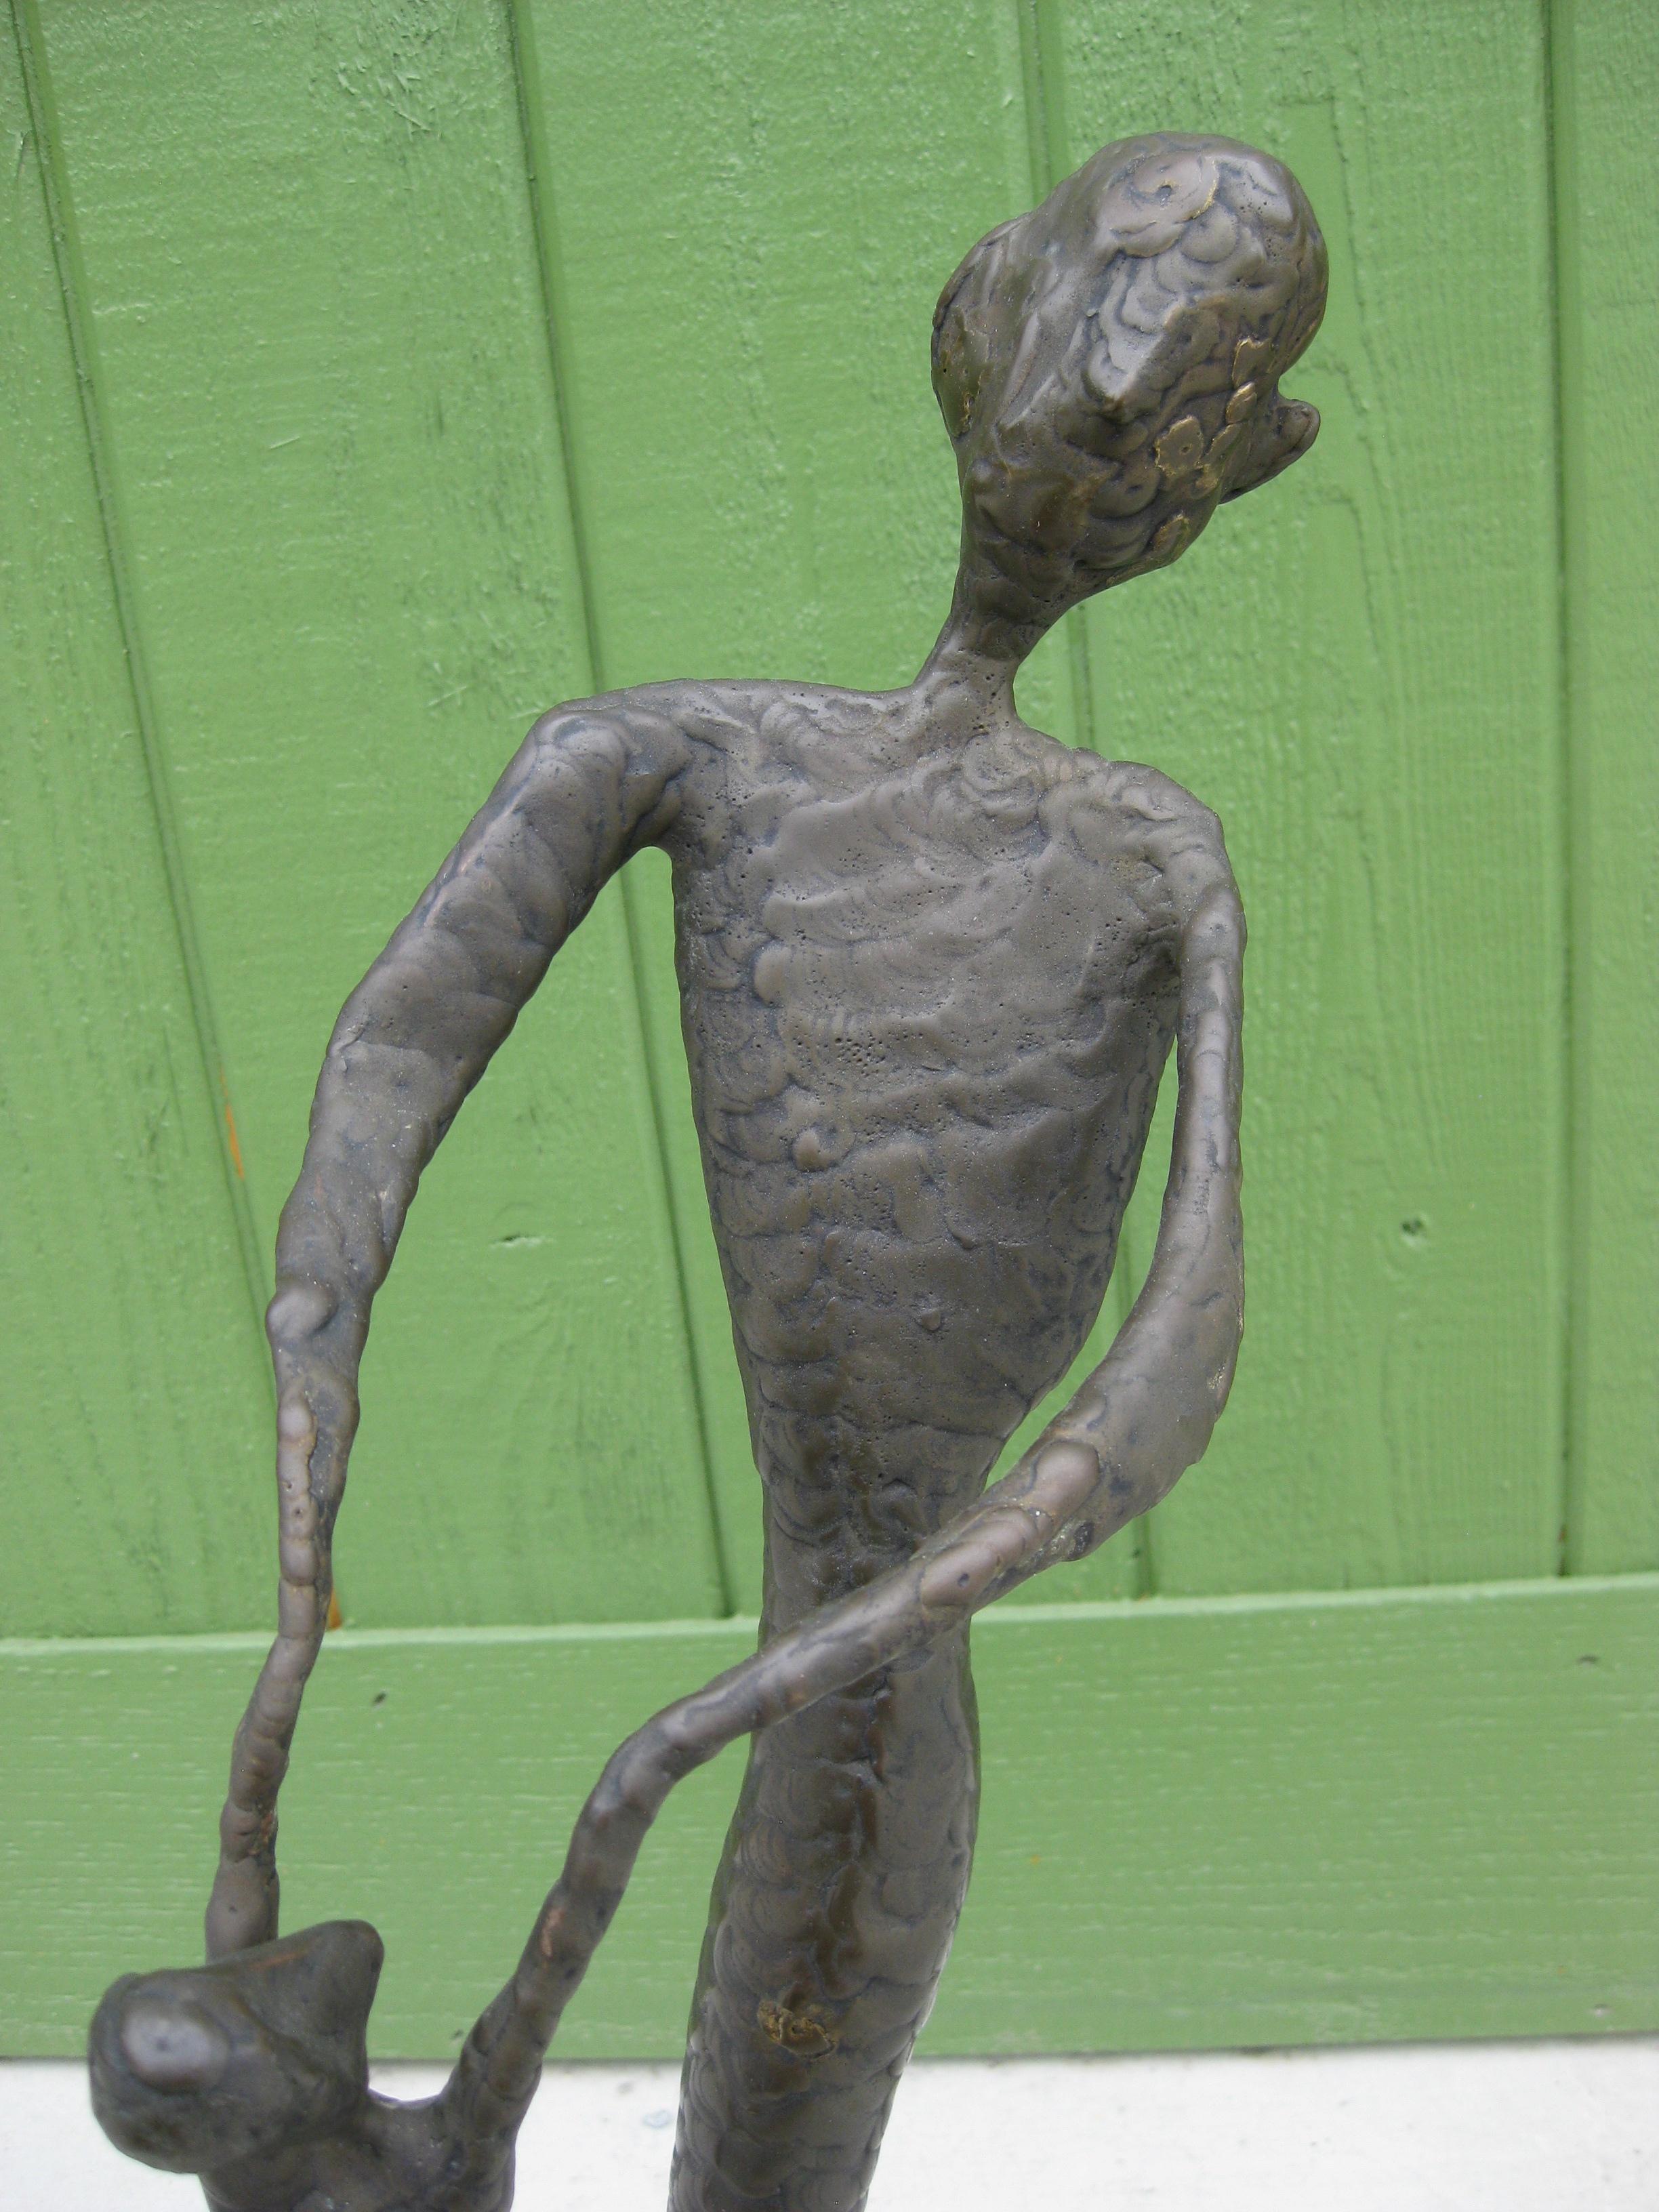 We are offering a wonderful modernist abstract hand made sculpture of a woman and child by the artist Burry. The sculpture dates from the 1960's. Made of welded metal and has a bronze finish. Wonderful form and design. Base is made of walnut wood.